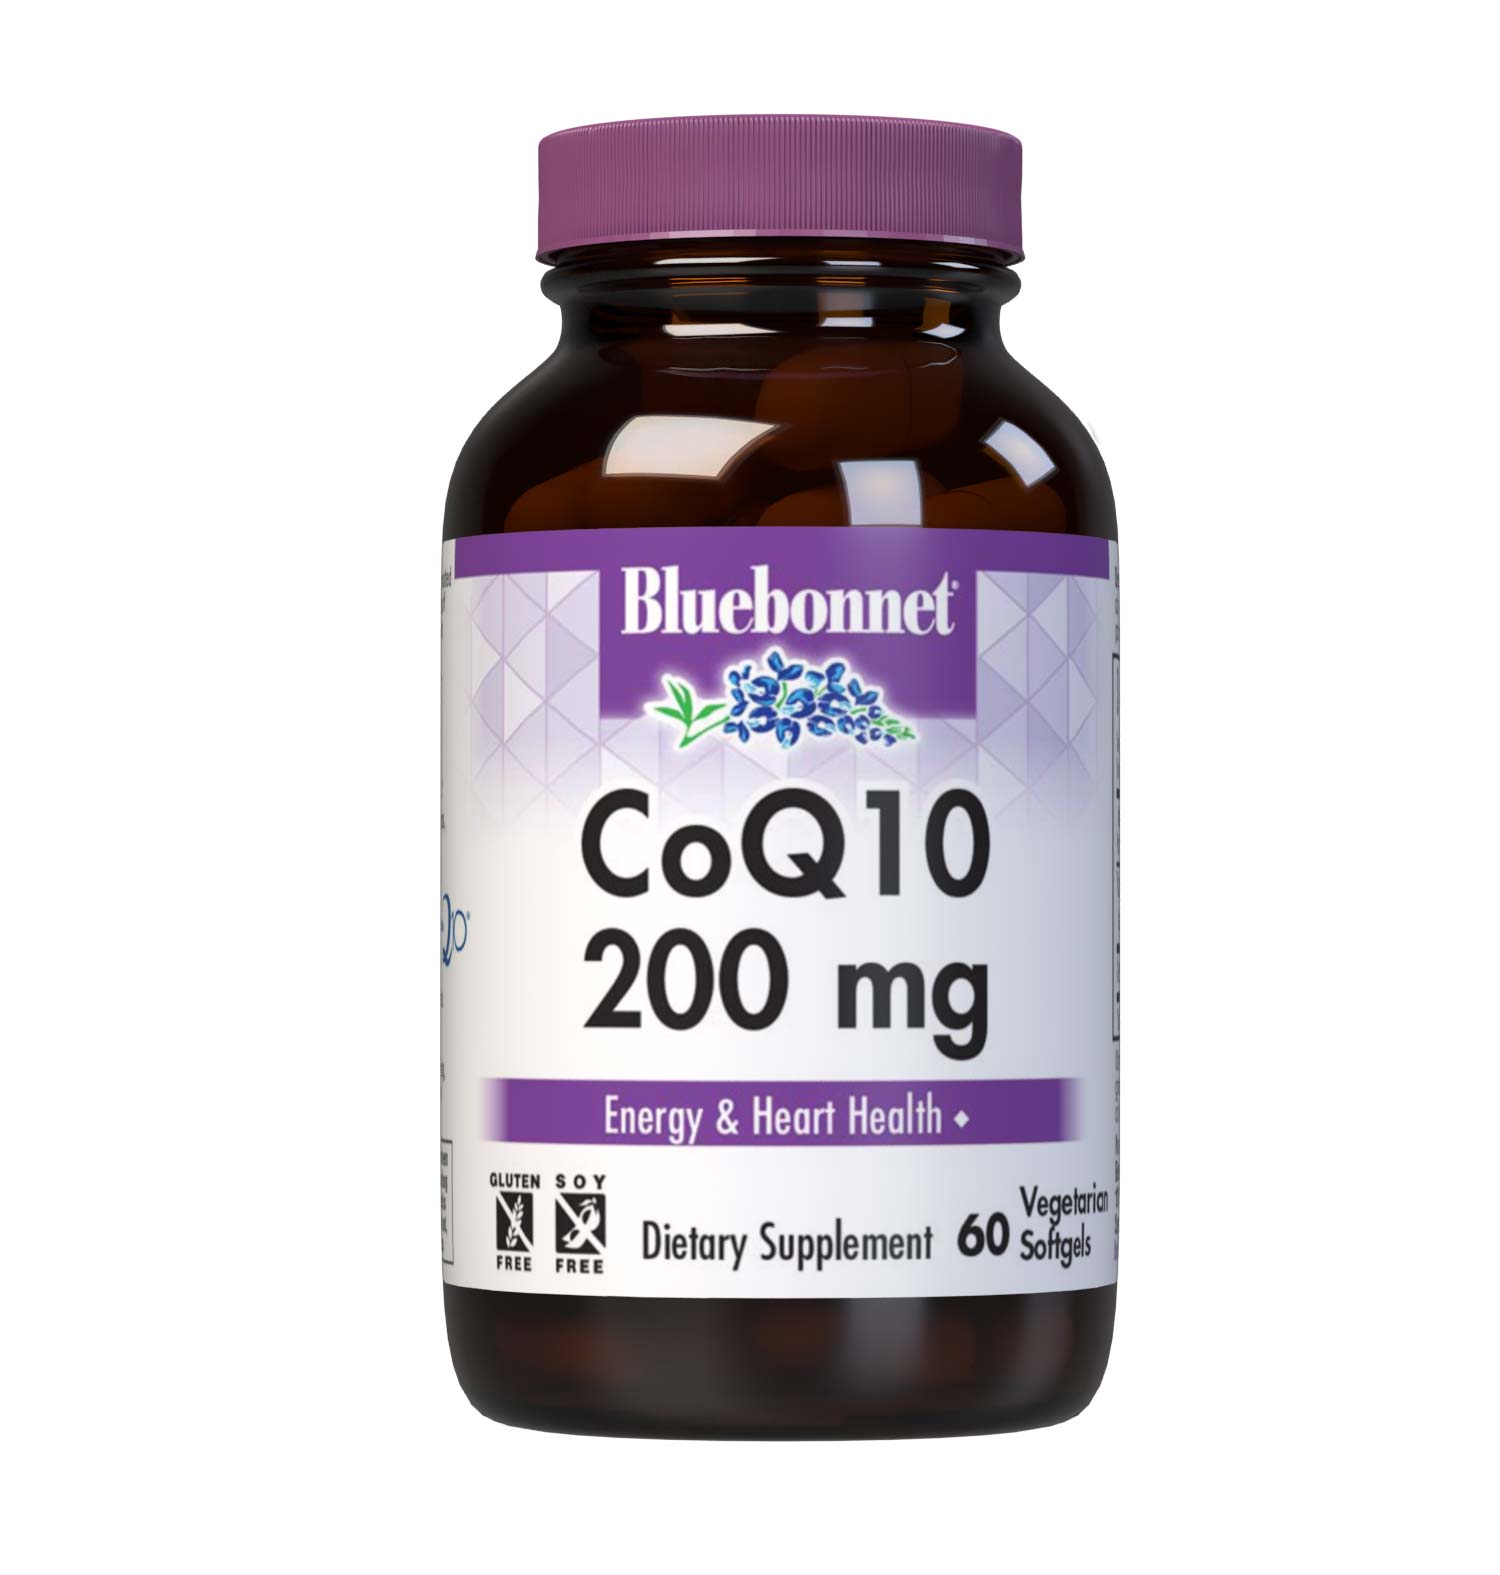 Bluebonnet’s CoQ10 200 mg 60 Vegetarian Softgels are formulated with the trans-isomer form of CoQ10 (ubiquinone) in a base of non-GMO sunflower oil along with vitamin E to help support energy levels and heart health. #size_60 count